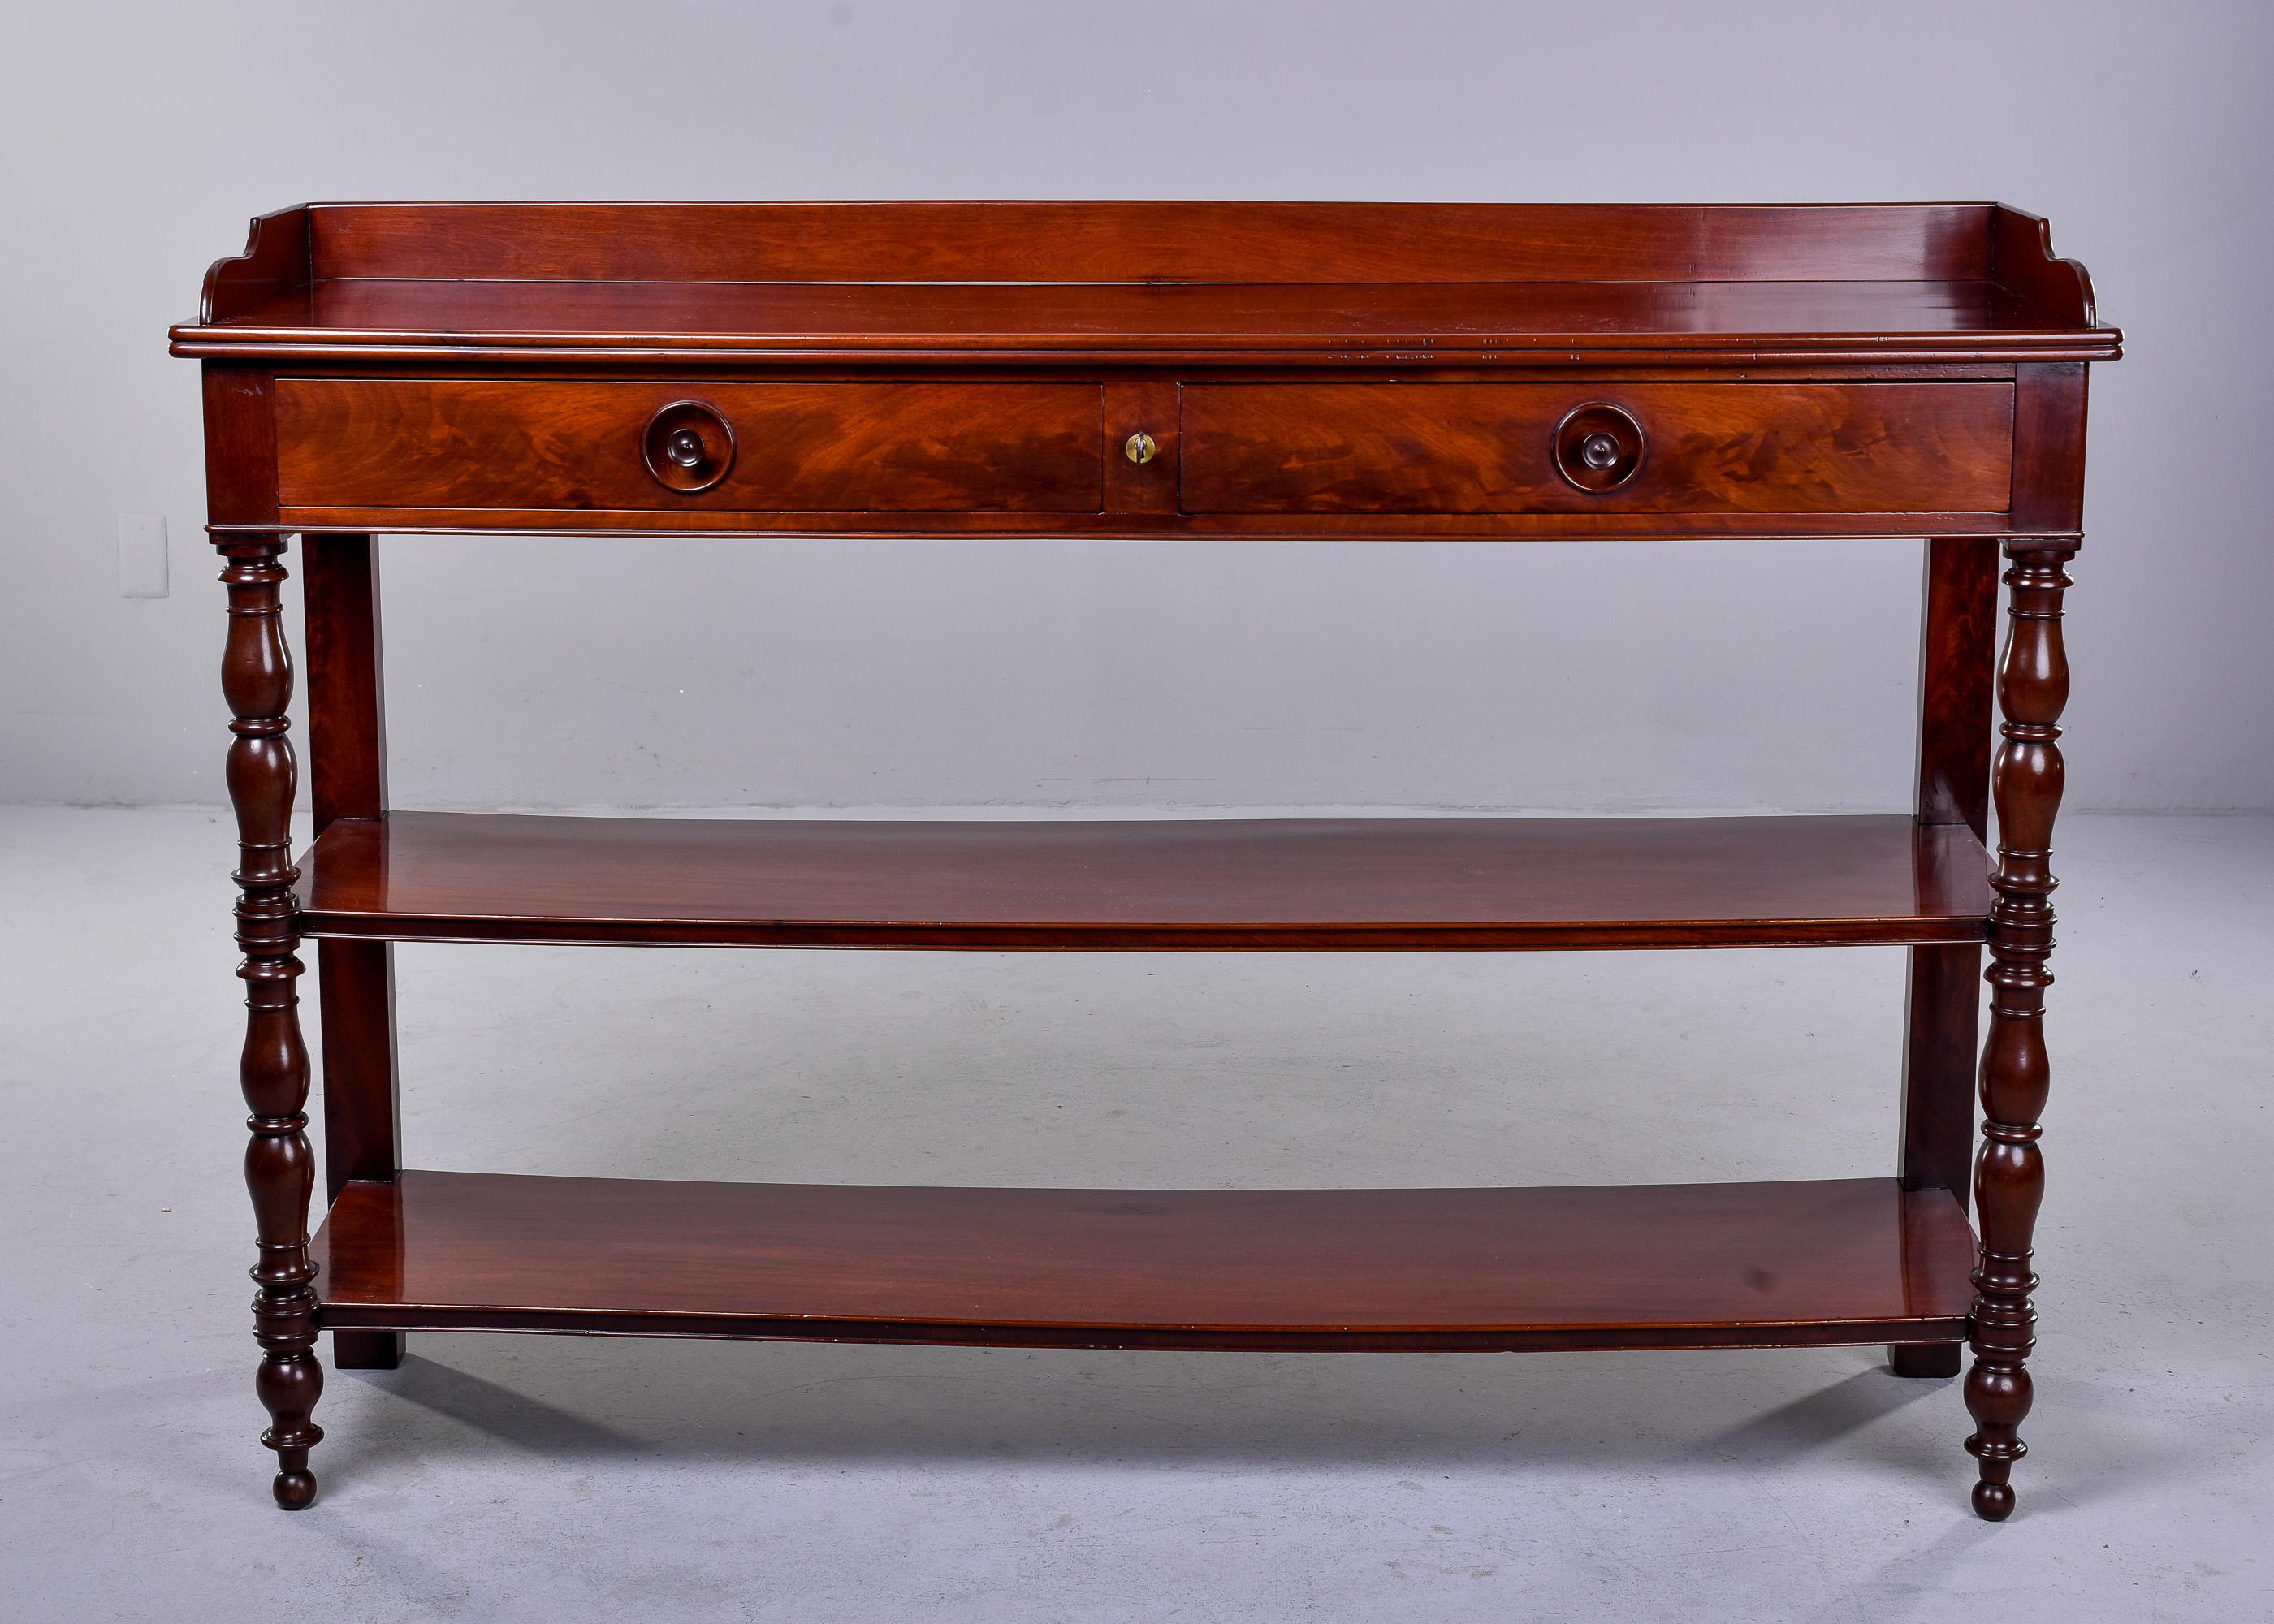 Early 20th C English Mahogany Three Tier Server with Drawers    In Good Condition For Sale In Troy, MI